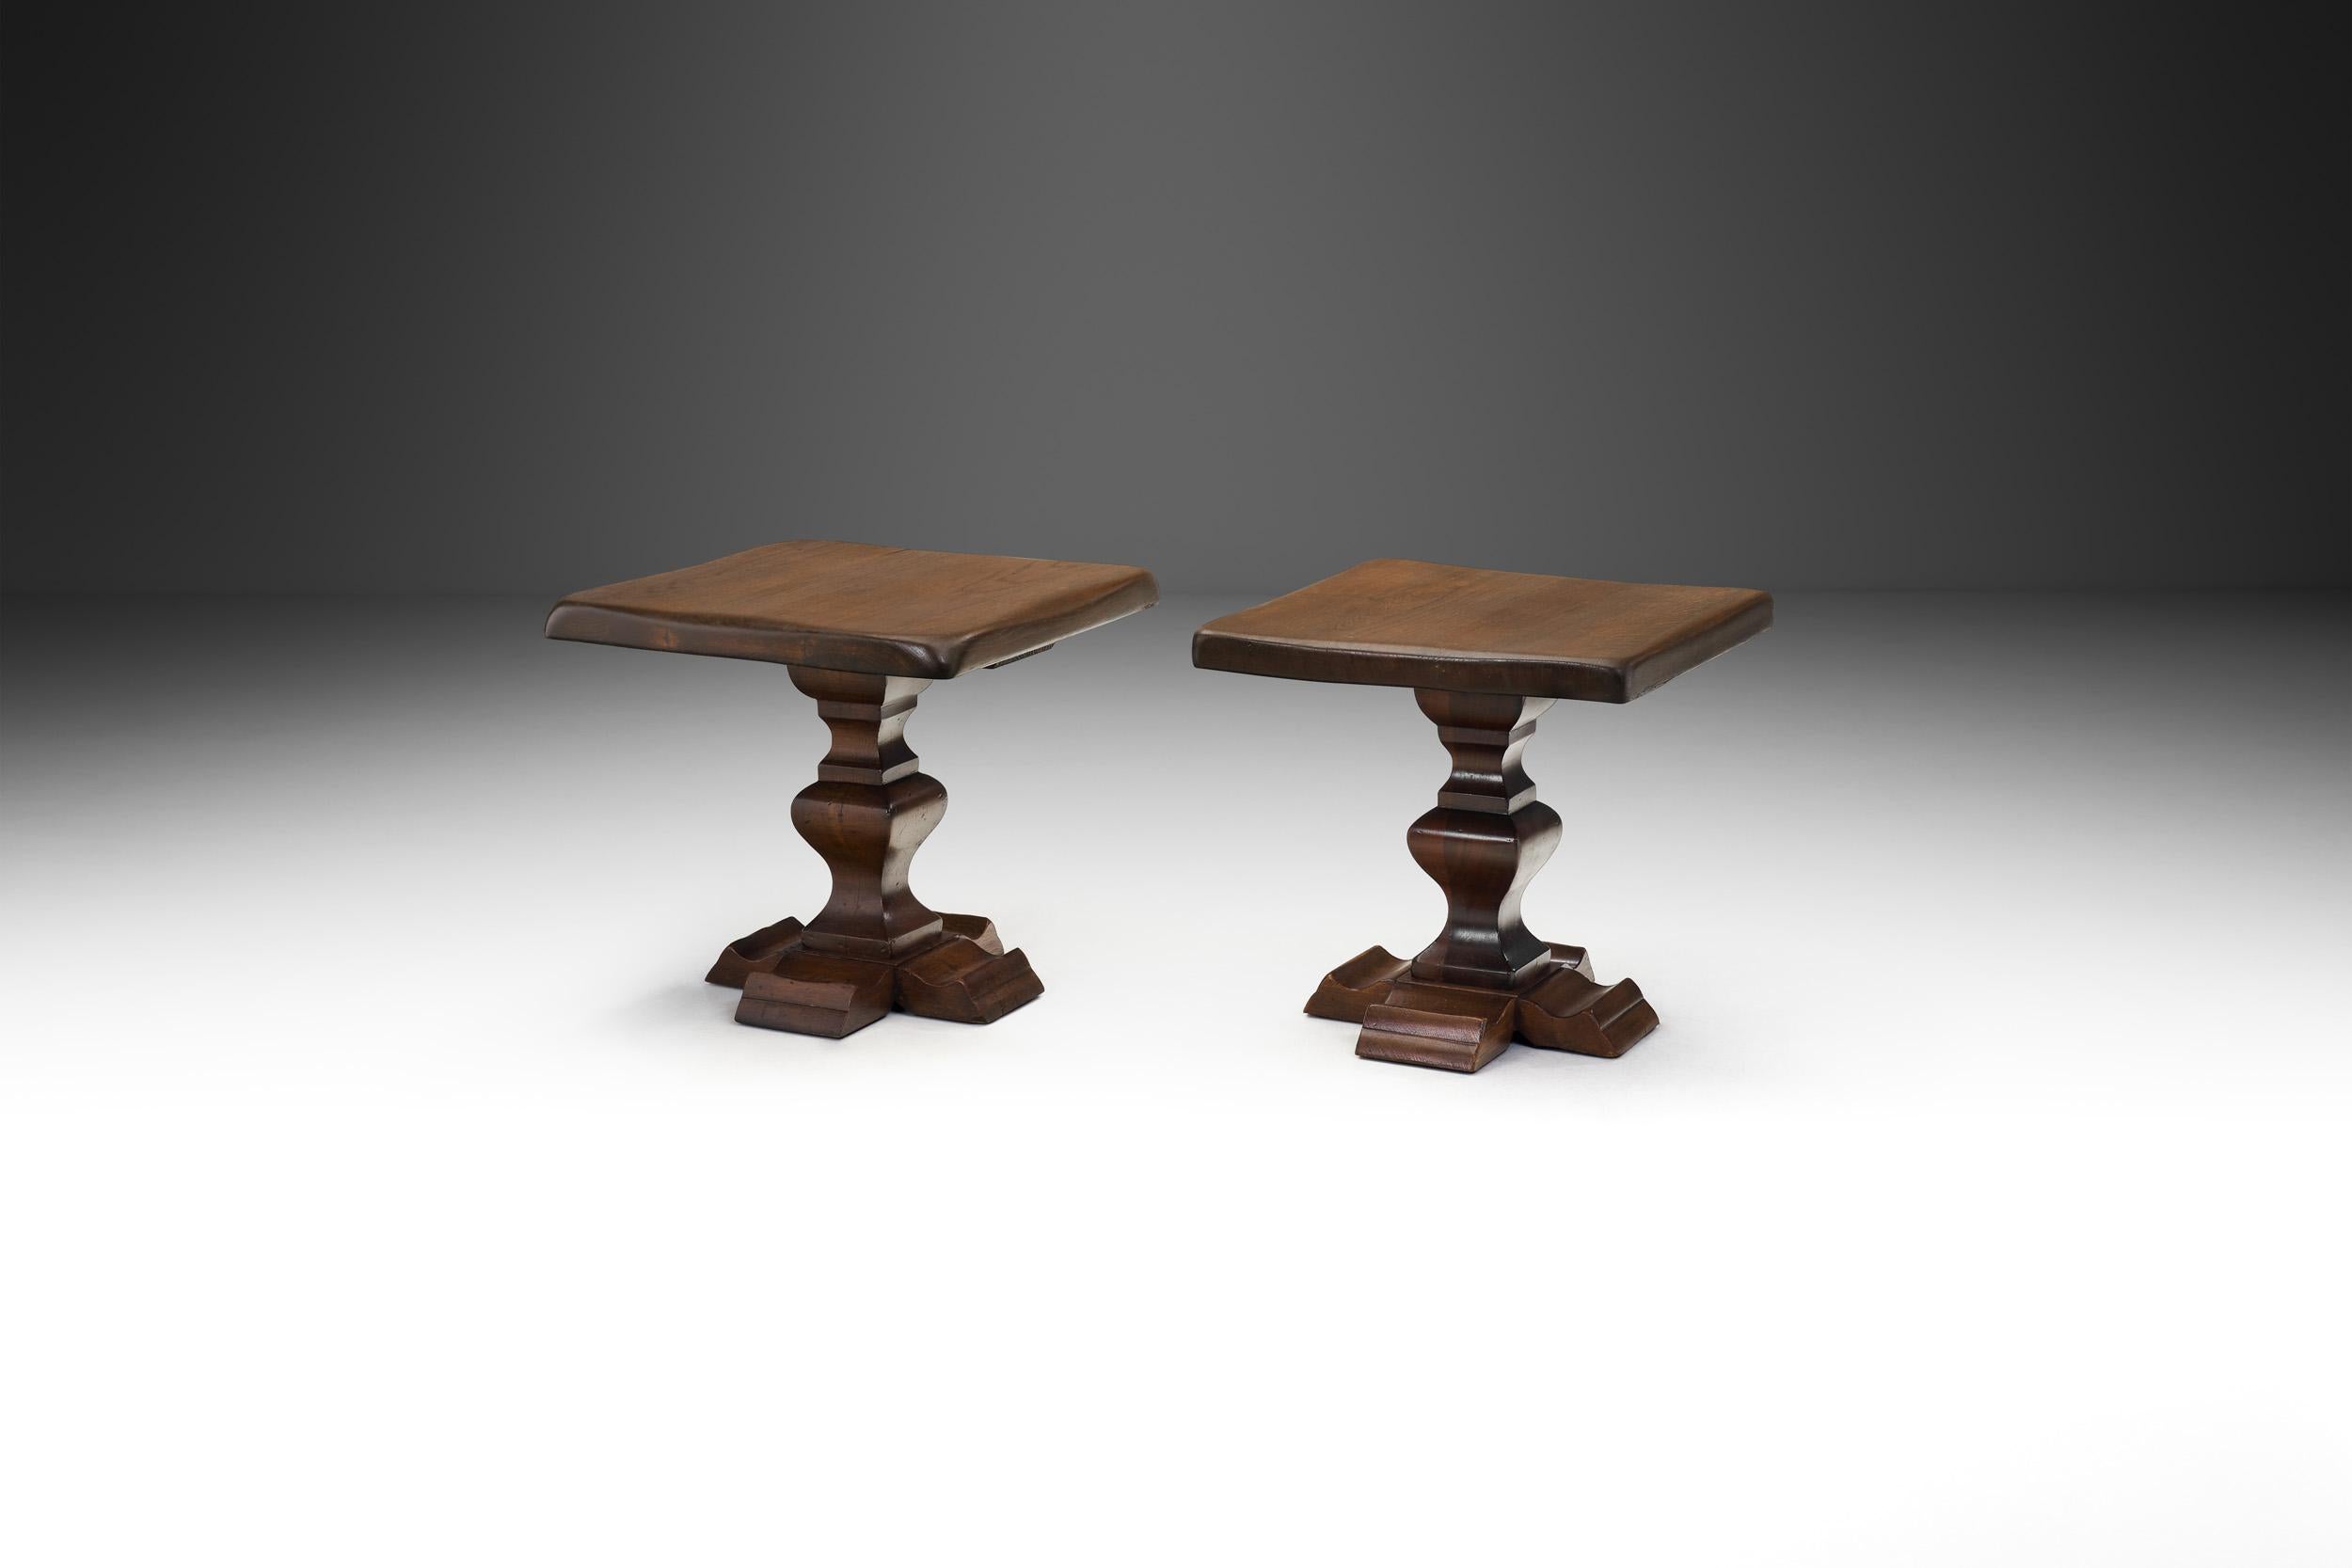 Hand-Crafted Set of Two Handcrafted Wood Side Tables, Europe 1970s For Sale